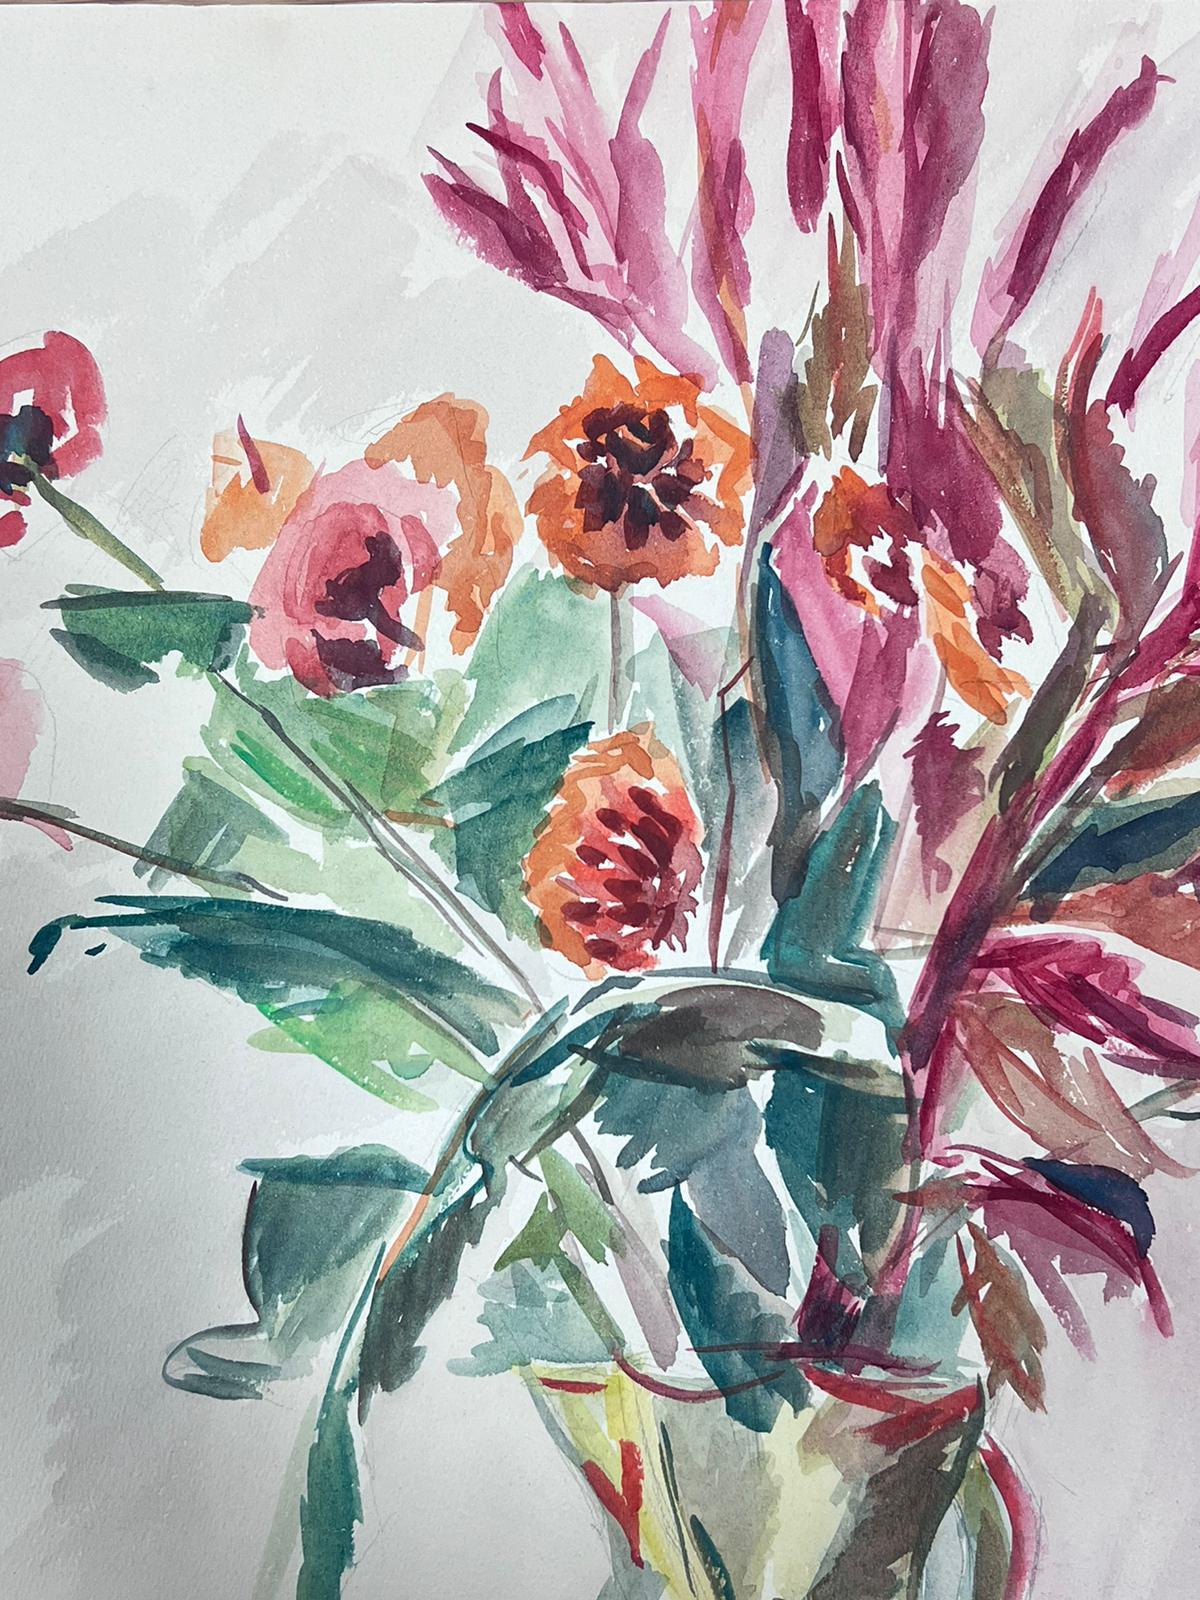 Mid 20th Century French Painting Pink Poppies and Ferns In China Vase - Art by Guy Nicod